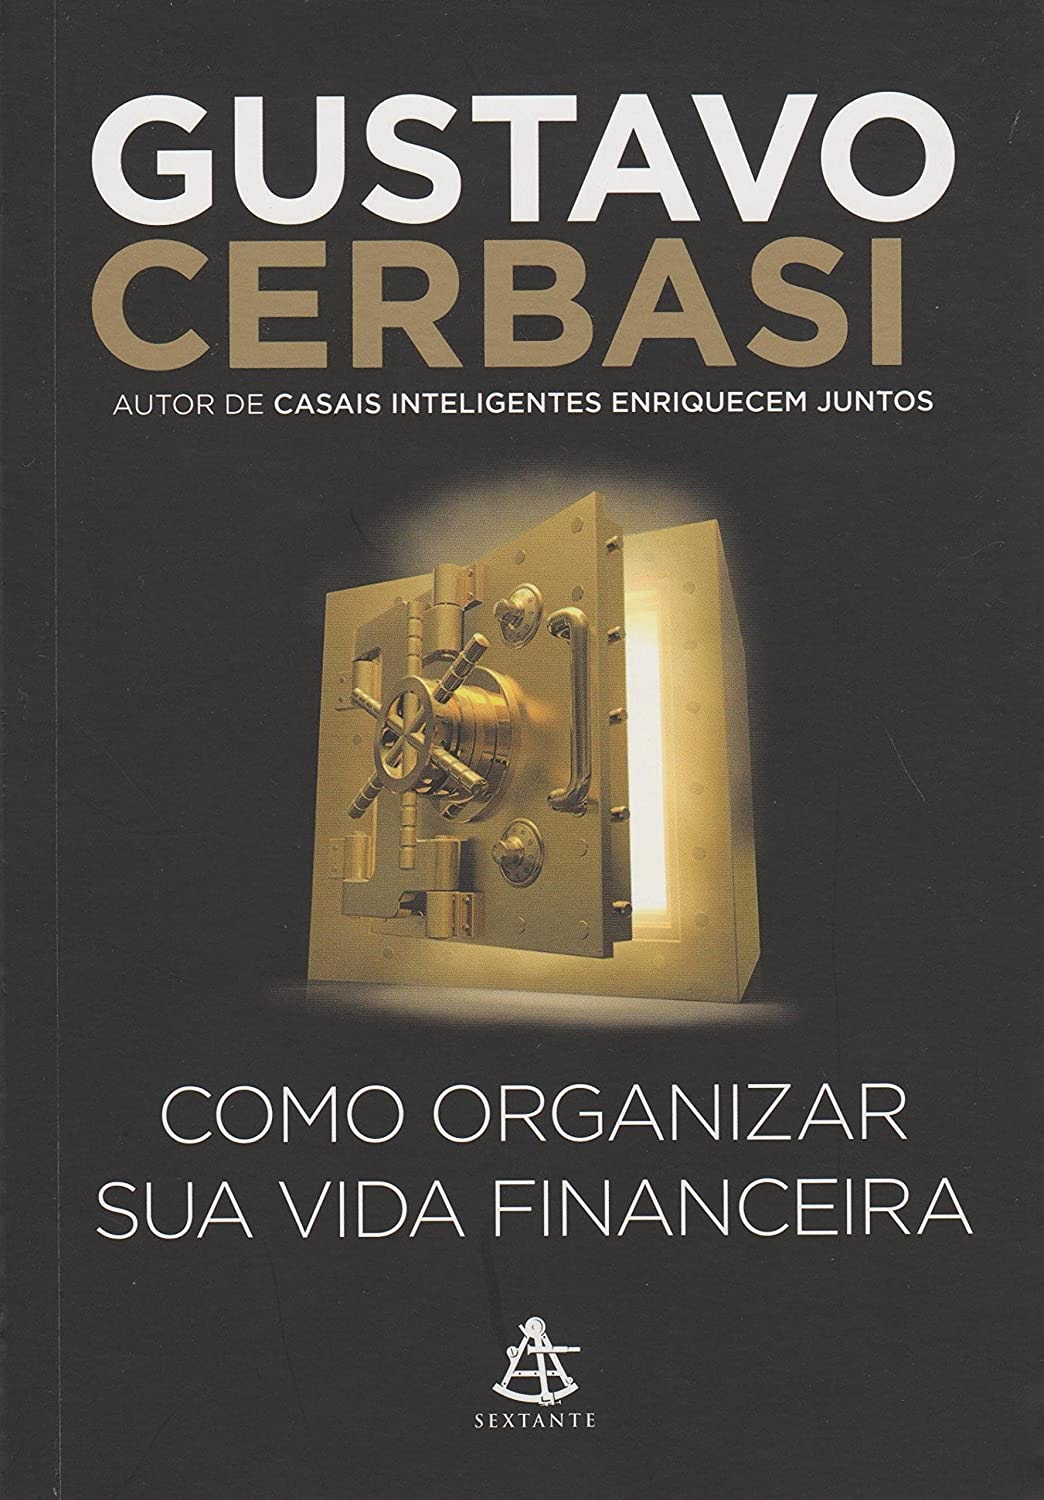 Book 'How to Organize Your Financial Life'